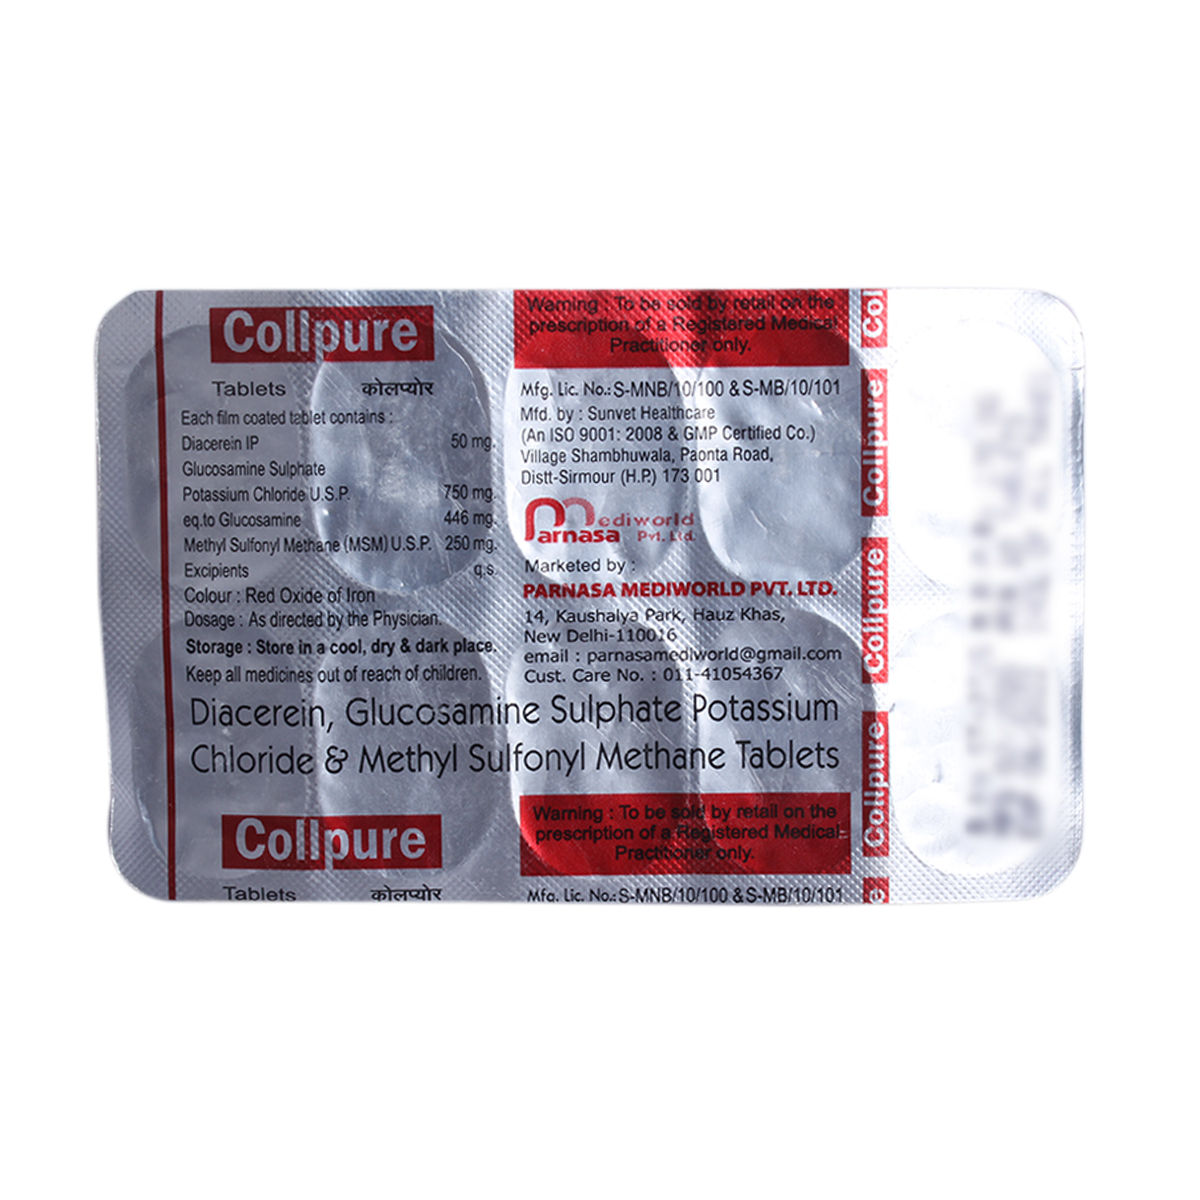 Collpure Tablet 10's, Pack of 10 TABLETS